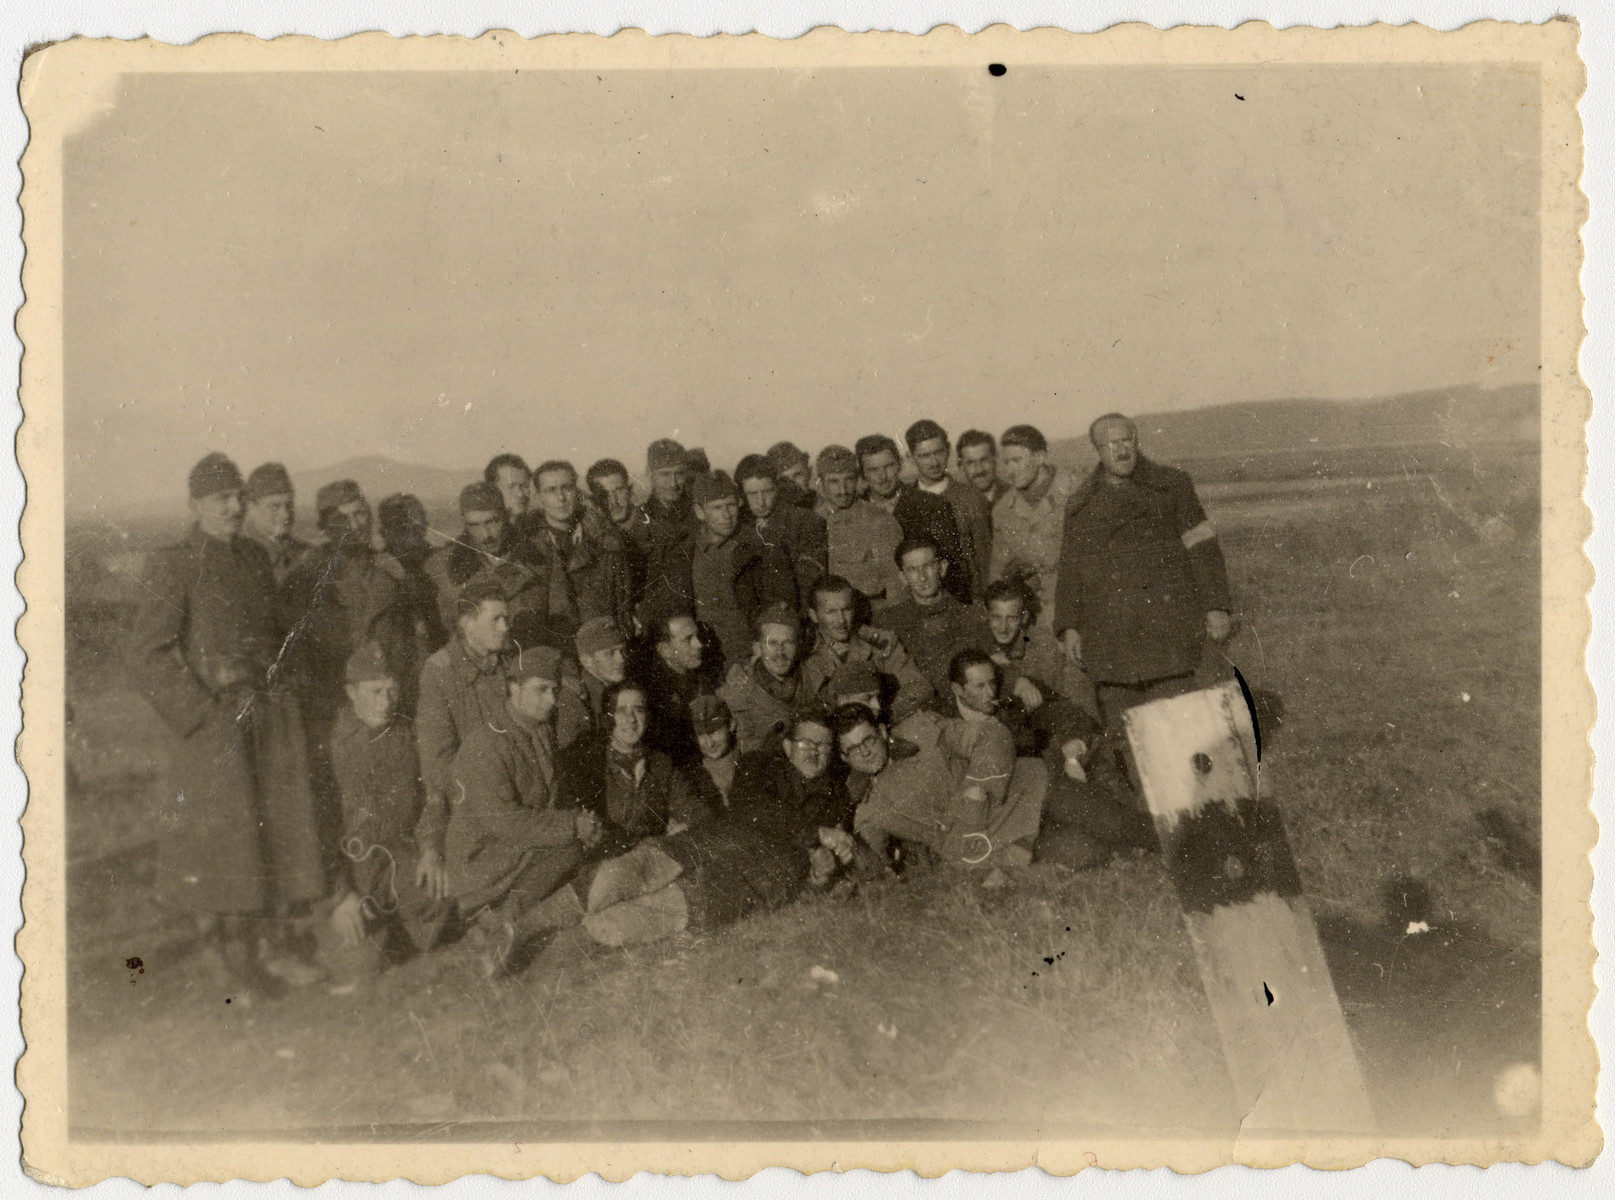 Group portrait of Hungarian Jews in a forced labor battalion.

Among those pictured is Geza Kovacs.